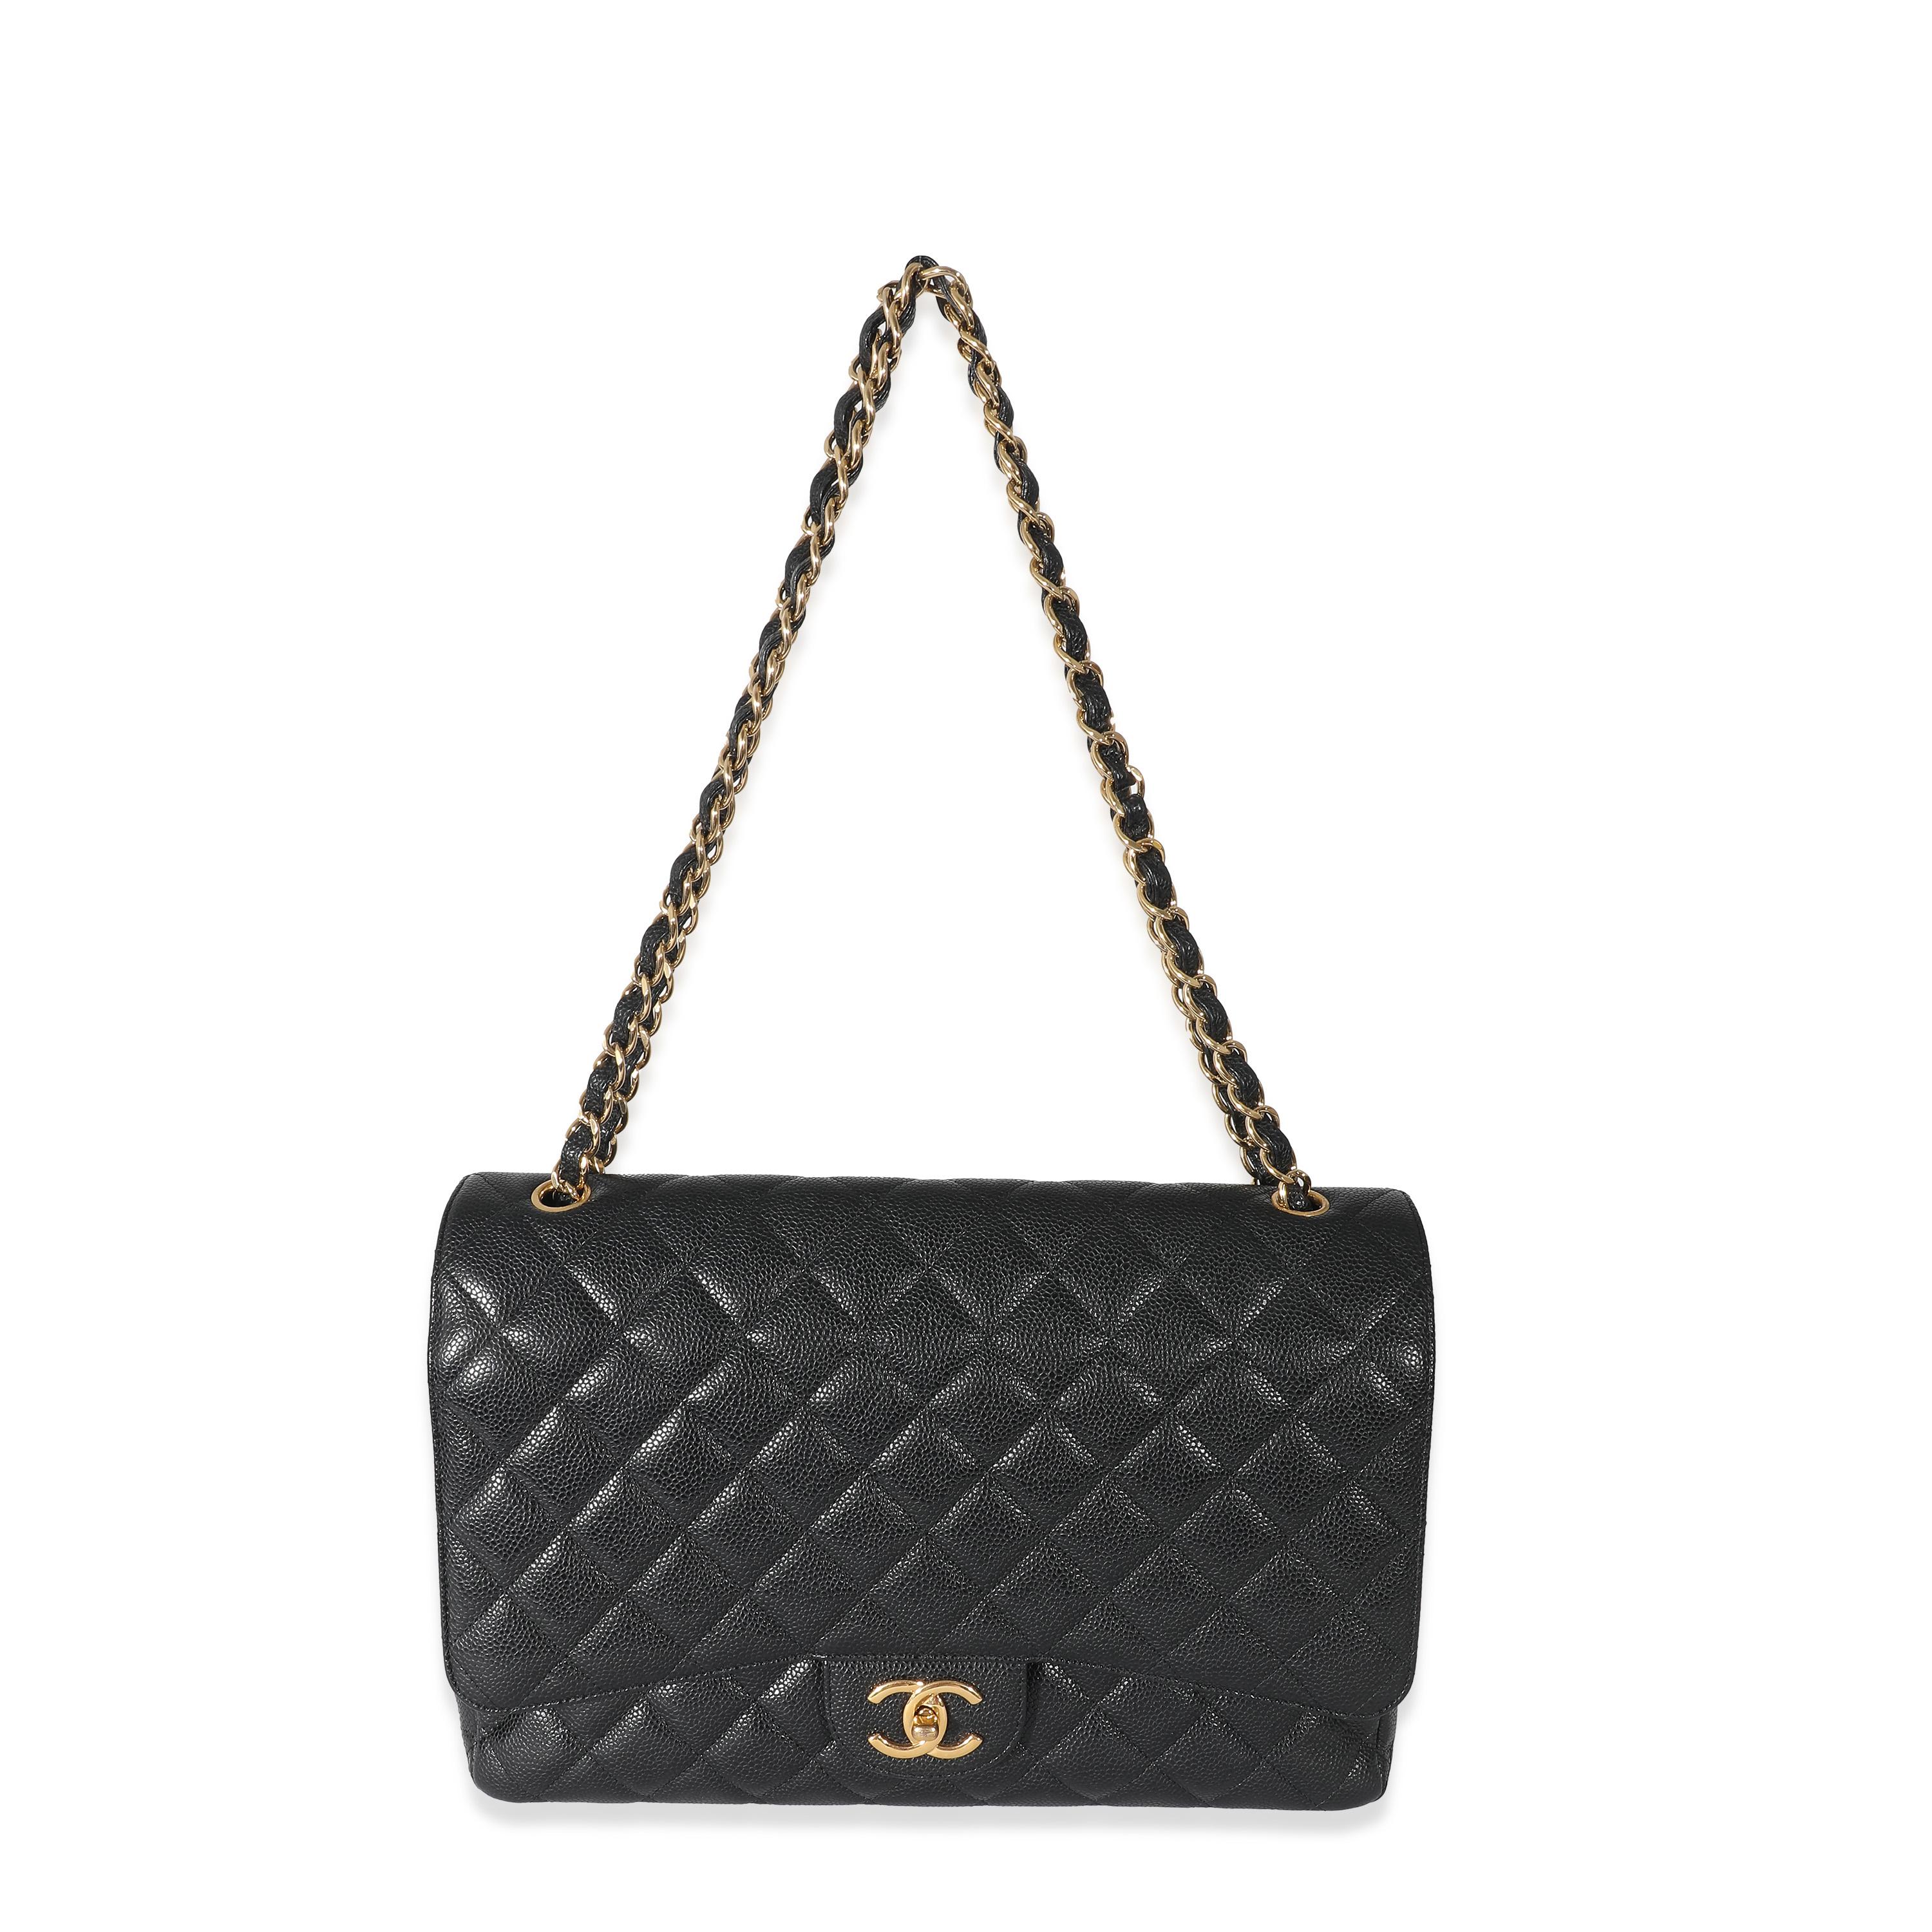 Listing Title: Chanel Black Caviar Maxi Double Flap Bag
SKU: 133186
Condition: Pre-owned 
Handbag Condition: Very Good
Condition Comments: Item is in very good condition with minor signs of wear. Exterior corner scuffing. Scratching to hardware.